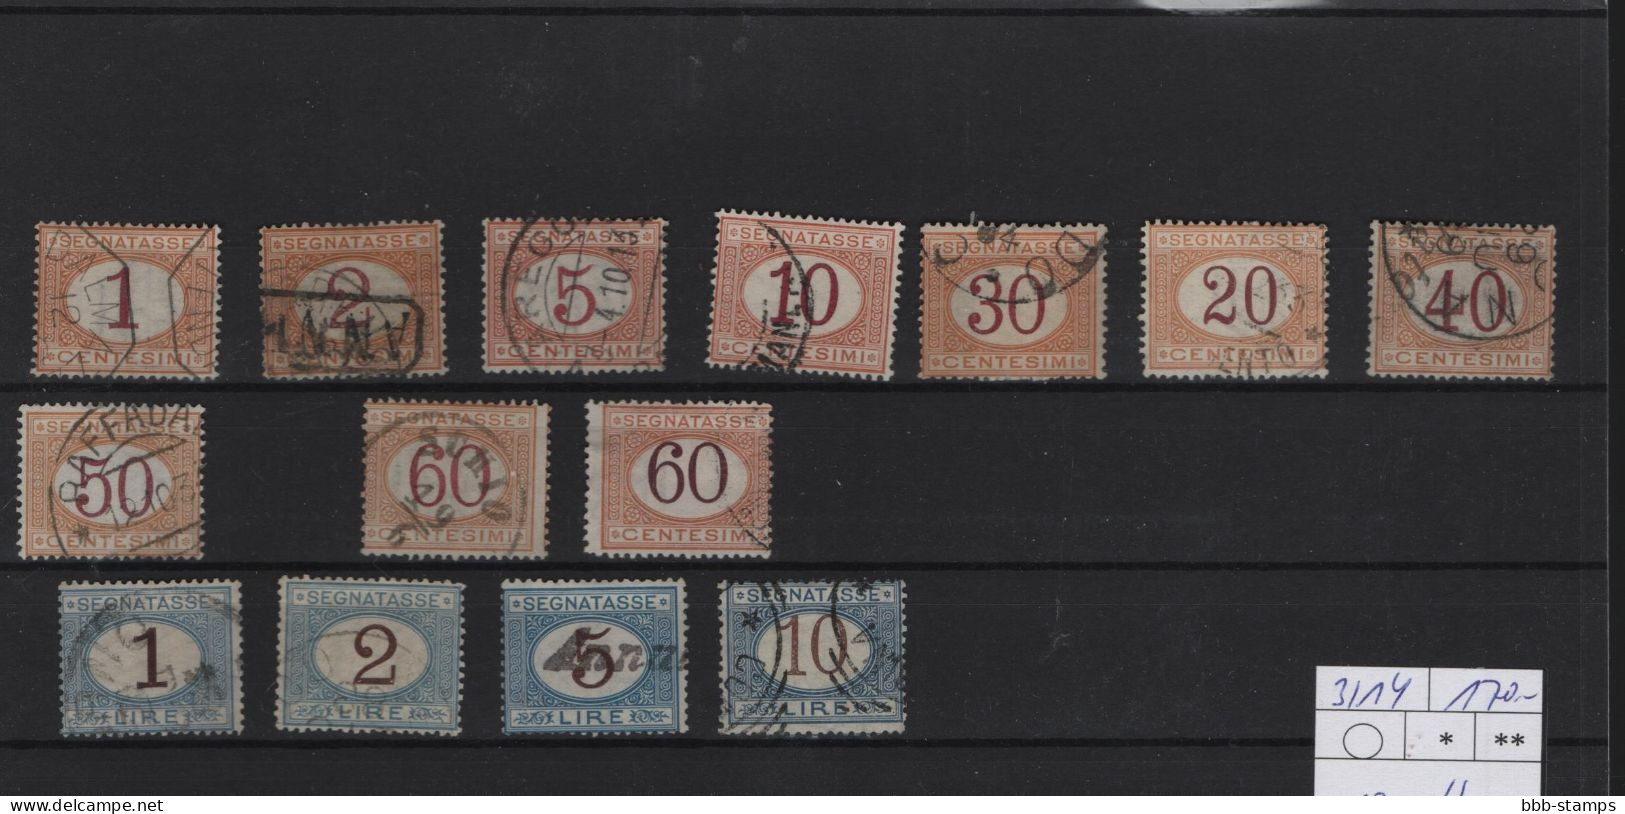 Italien Michel Cat.No.  Duty Used 3/14 (10a/b) - Postage Due